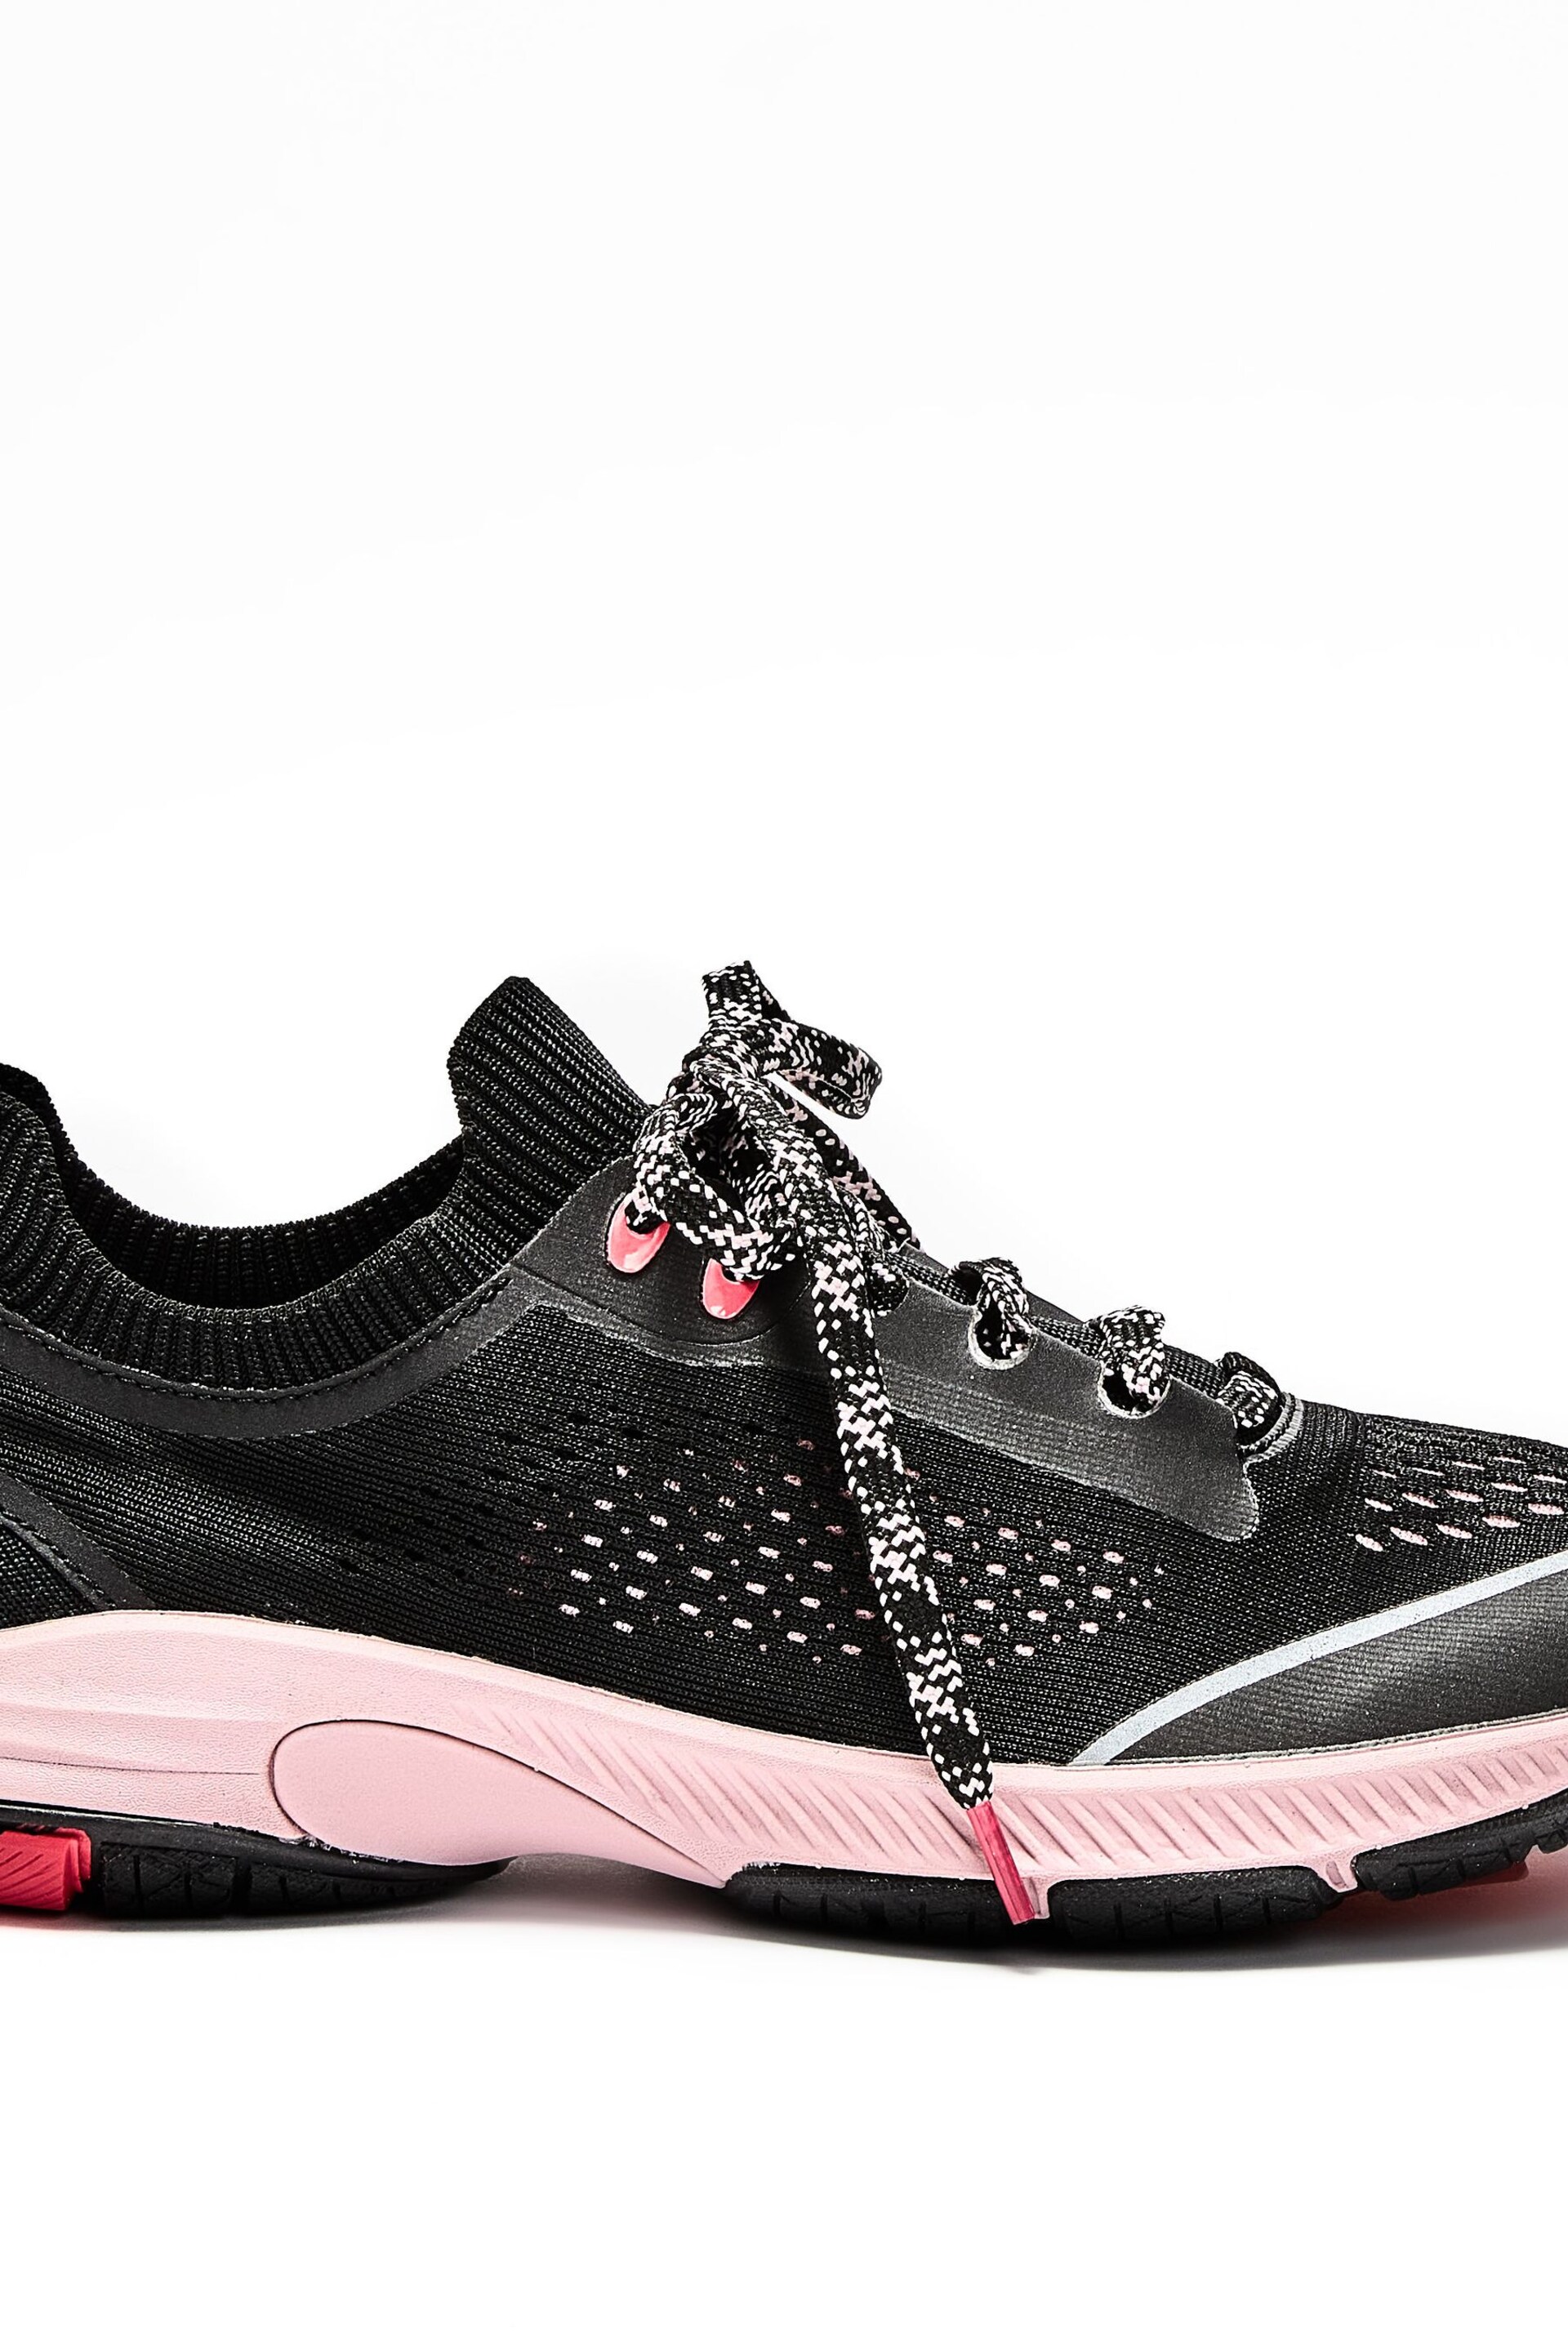 Black & Pink Next Active Sports V254W Running Trainers - Image 26 of 26